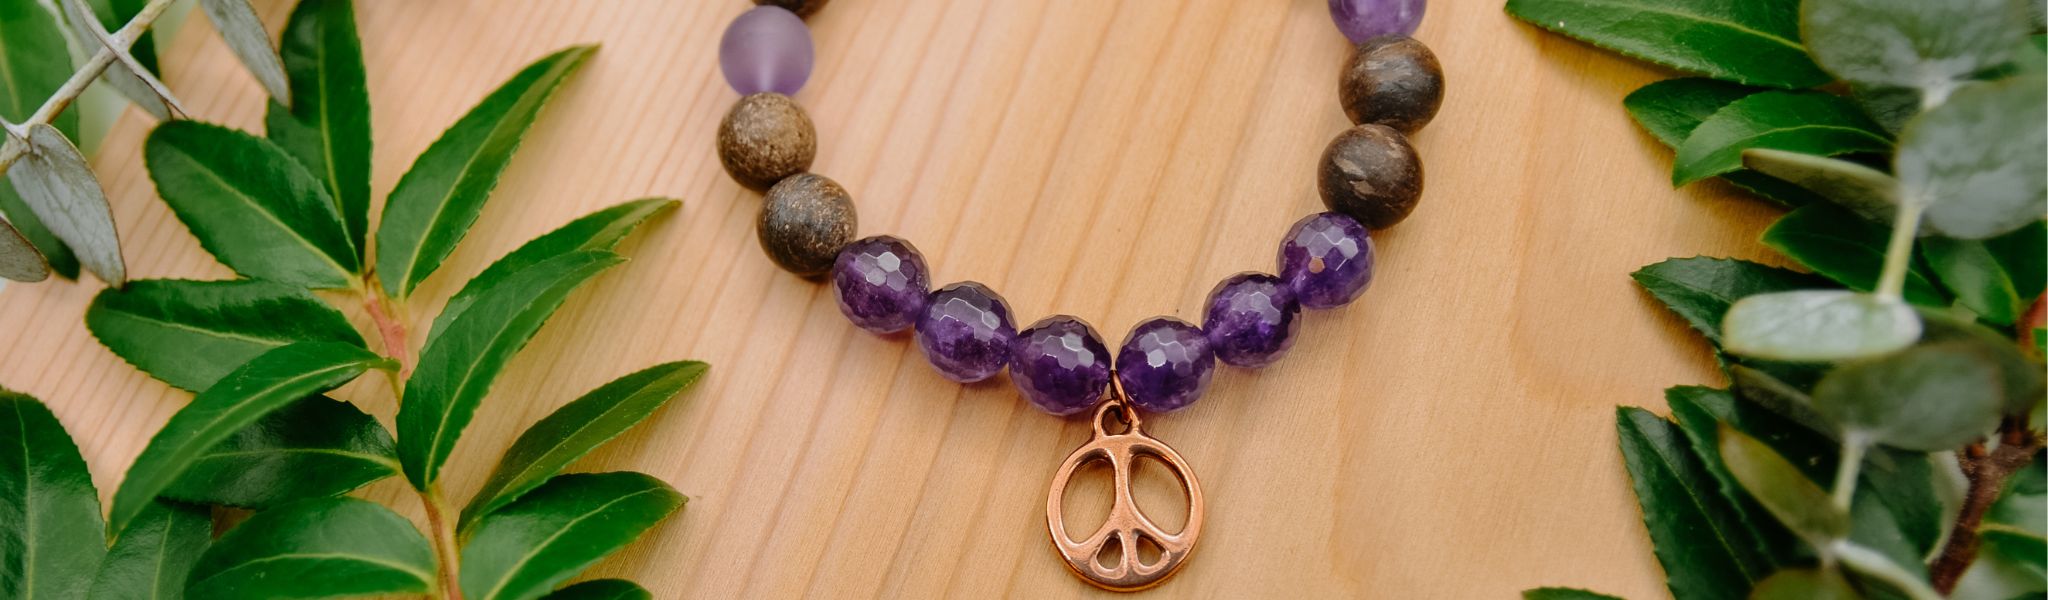 Natural gemstone jewelry | Bracelet with Amethyst and Bronzite Gemstones by Emerald Sun Creations